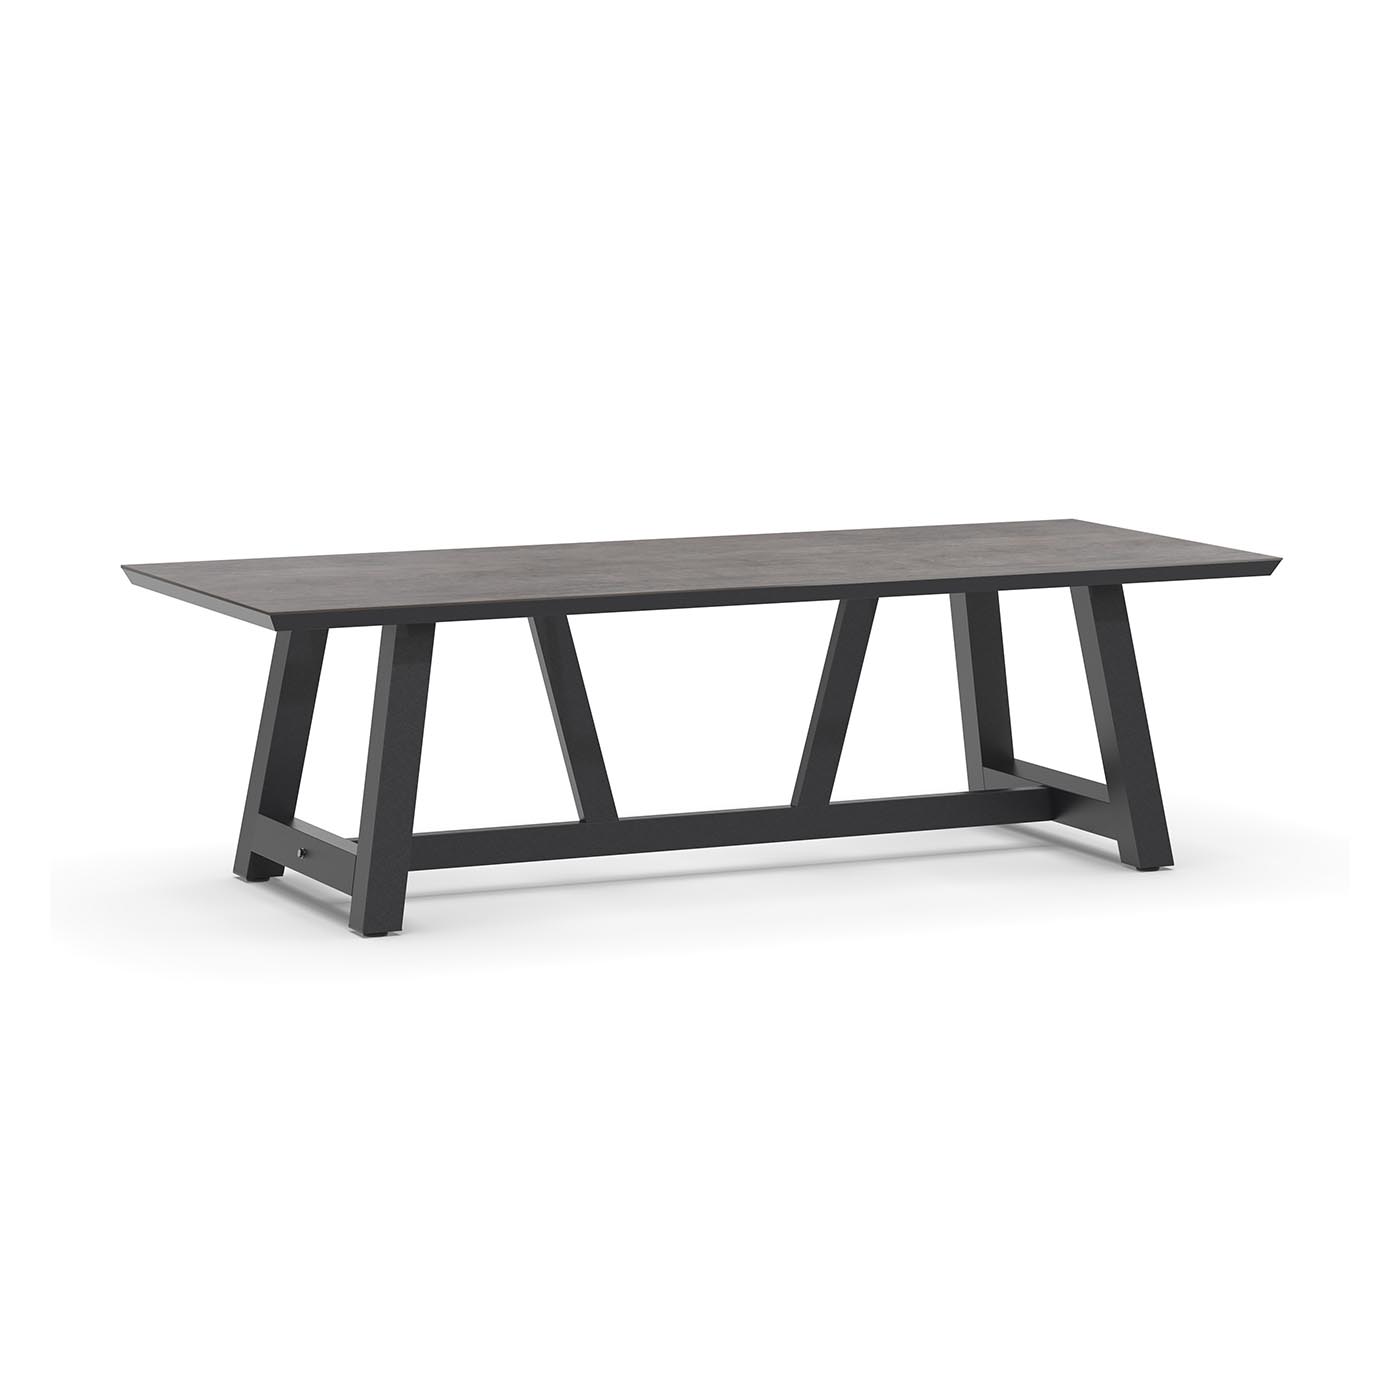 Ozon Dining Table Trespa Forest Grey 250 x 100 cm Charcoal